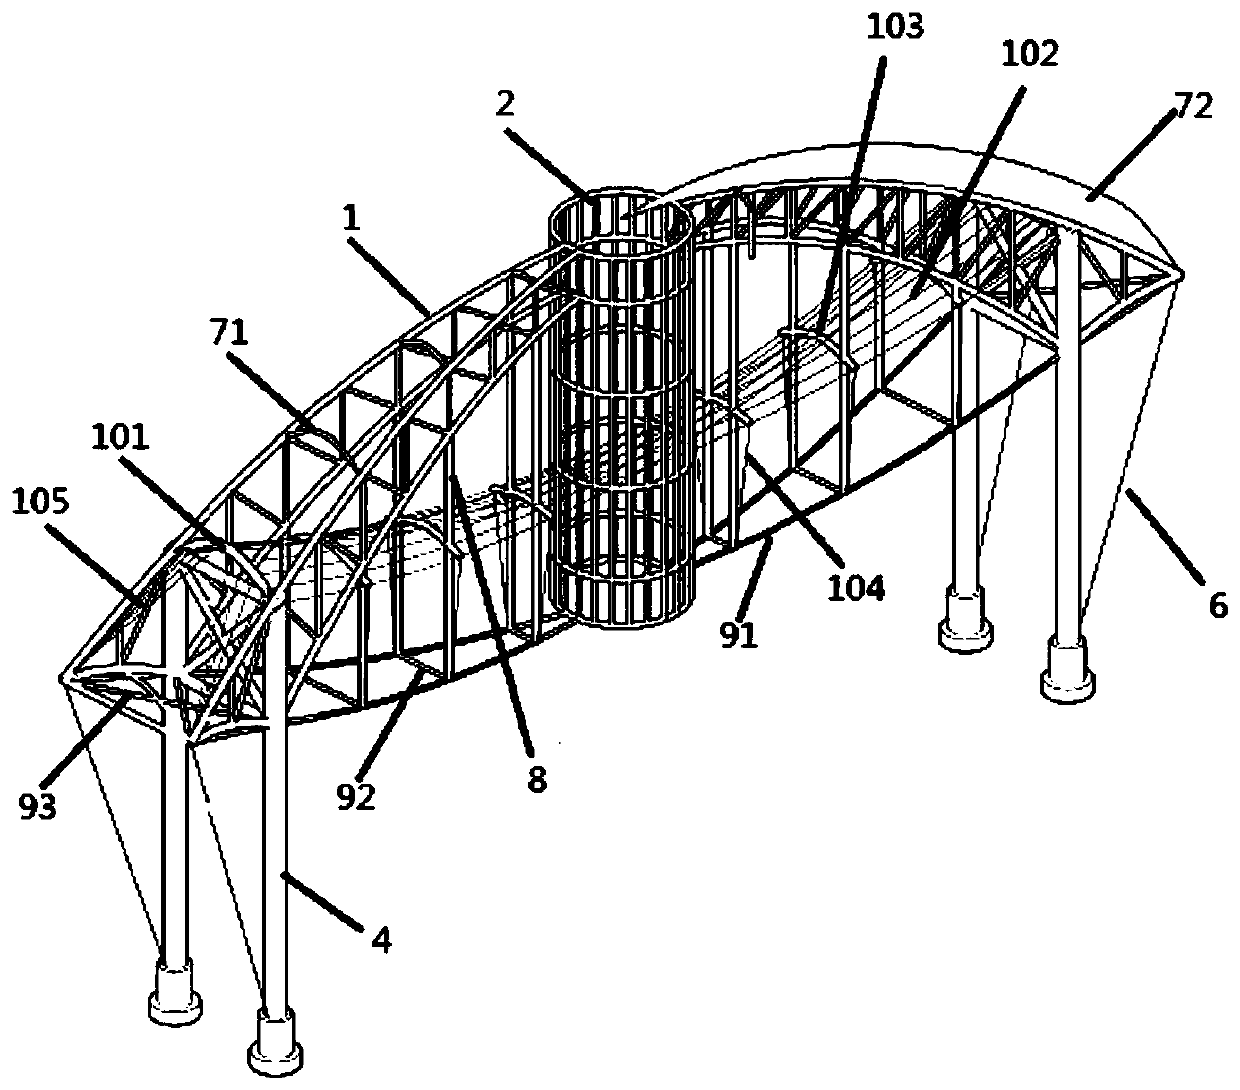 Super-long-span spoke-type suspend-dome structure based on flying-swallow-type truss arch